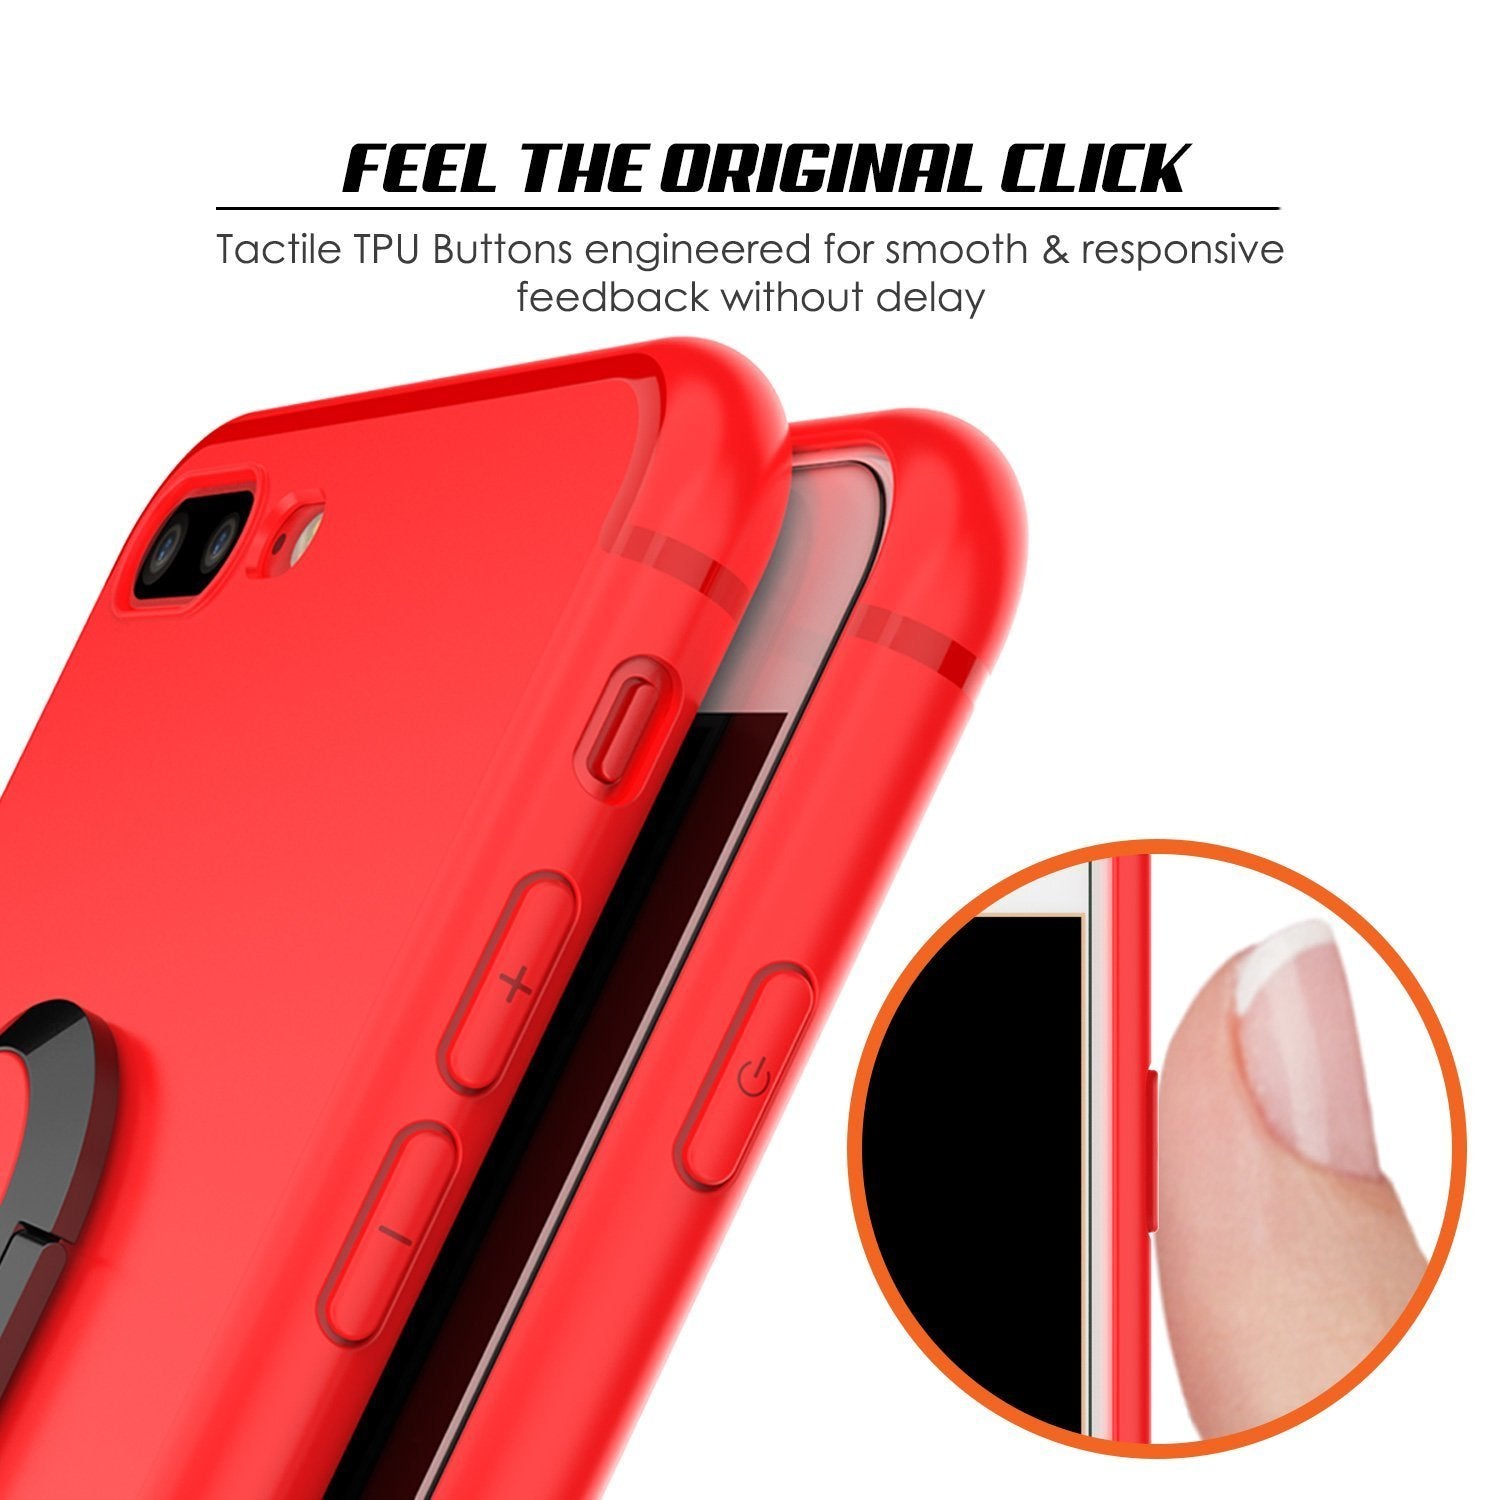 iPhone 8 Plus Case, Punkcase Magnetix Protective TPU Cover W/ Kickstand, Ring Grip Holder & Metal Plate for Magnetic Car Phone Mount PLUS Tempered Glass Screen Protector for Apple iPhone 7+/8+ [Red]